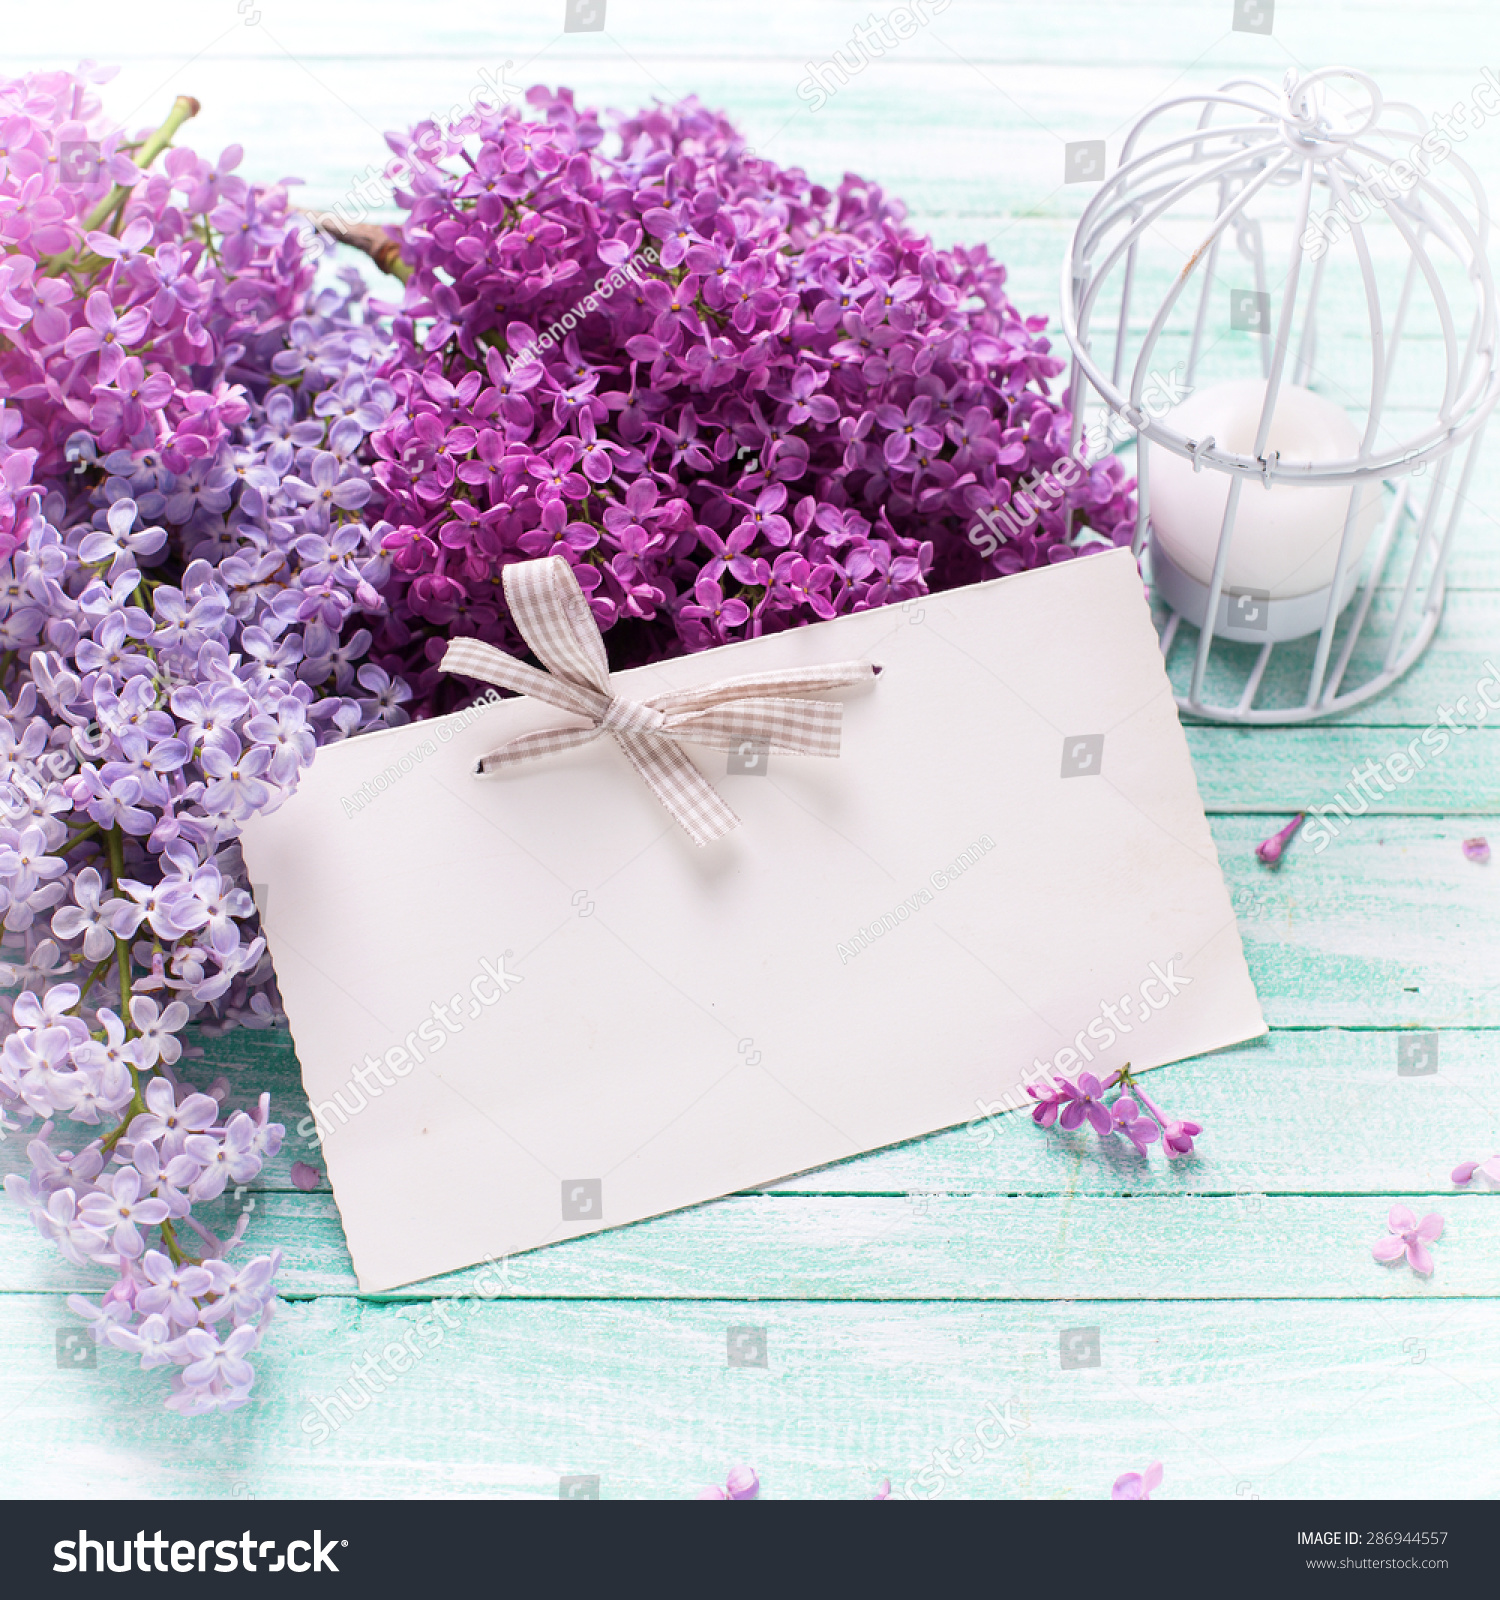 Background Fresh Lilac Flowers Candle Empty Stock Photo (Royalty ...